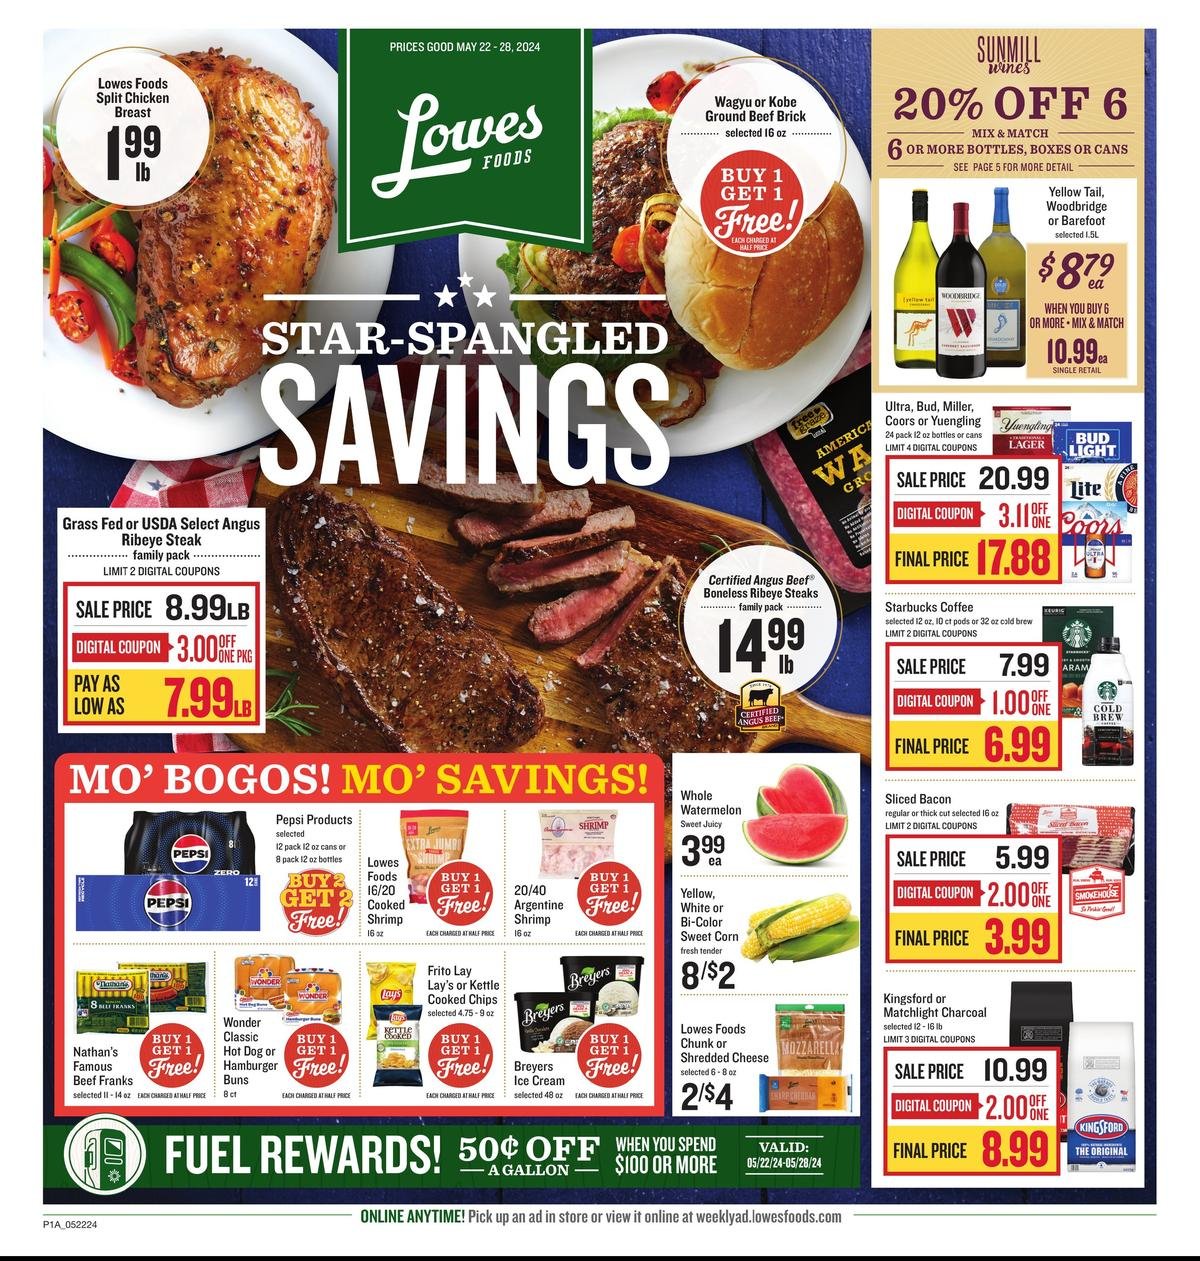 Lowes Foods weekly ad - page 1